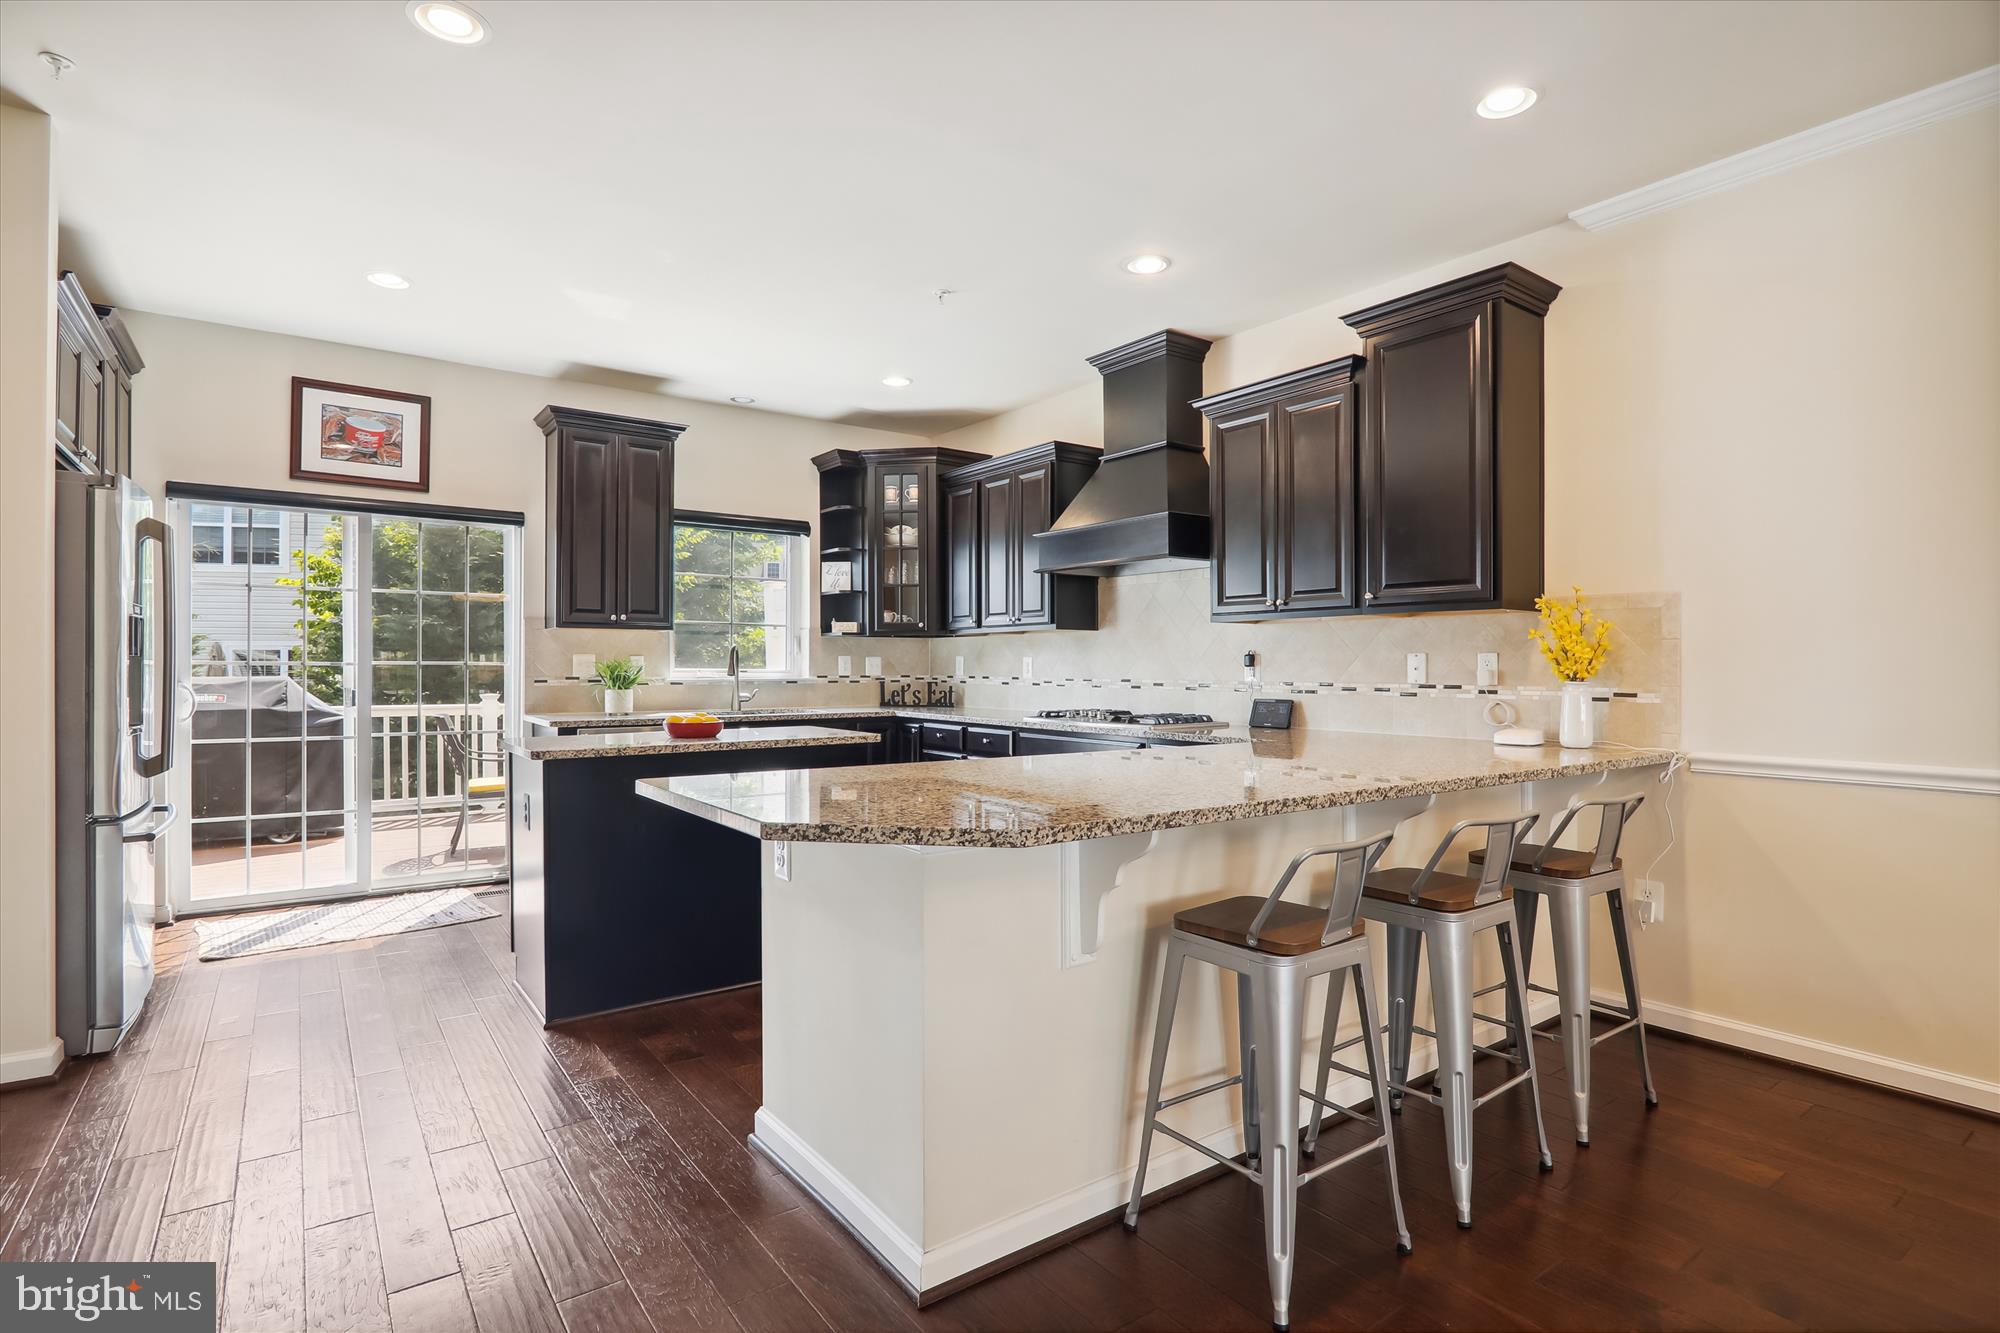 a kitchen with stainless steel appliances kitchen island granite countertop a stove a refrigerator a sink and a dining table with wooden floor